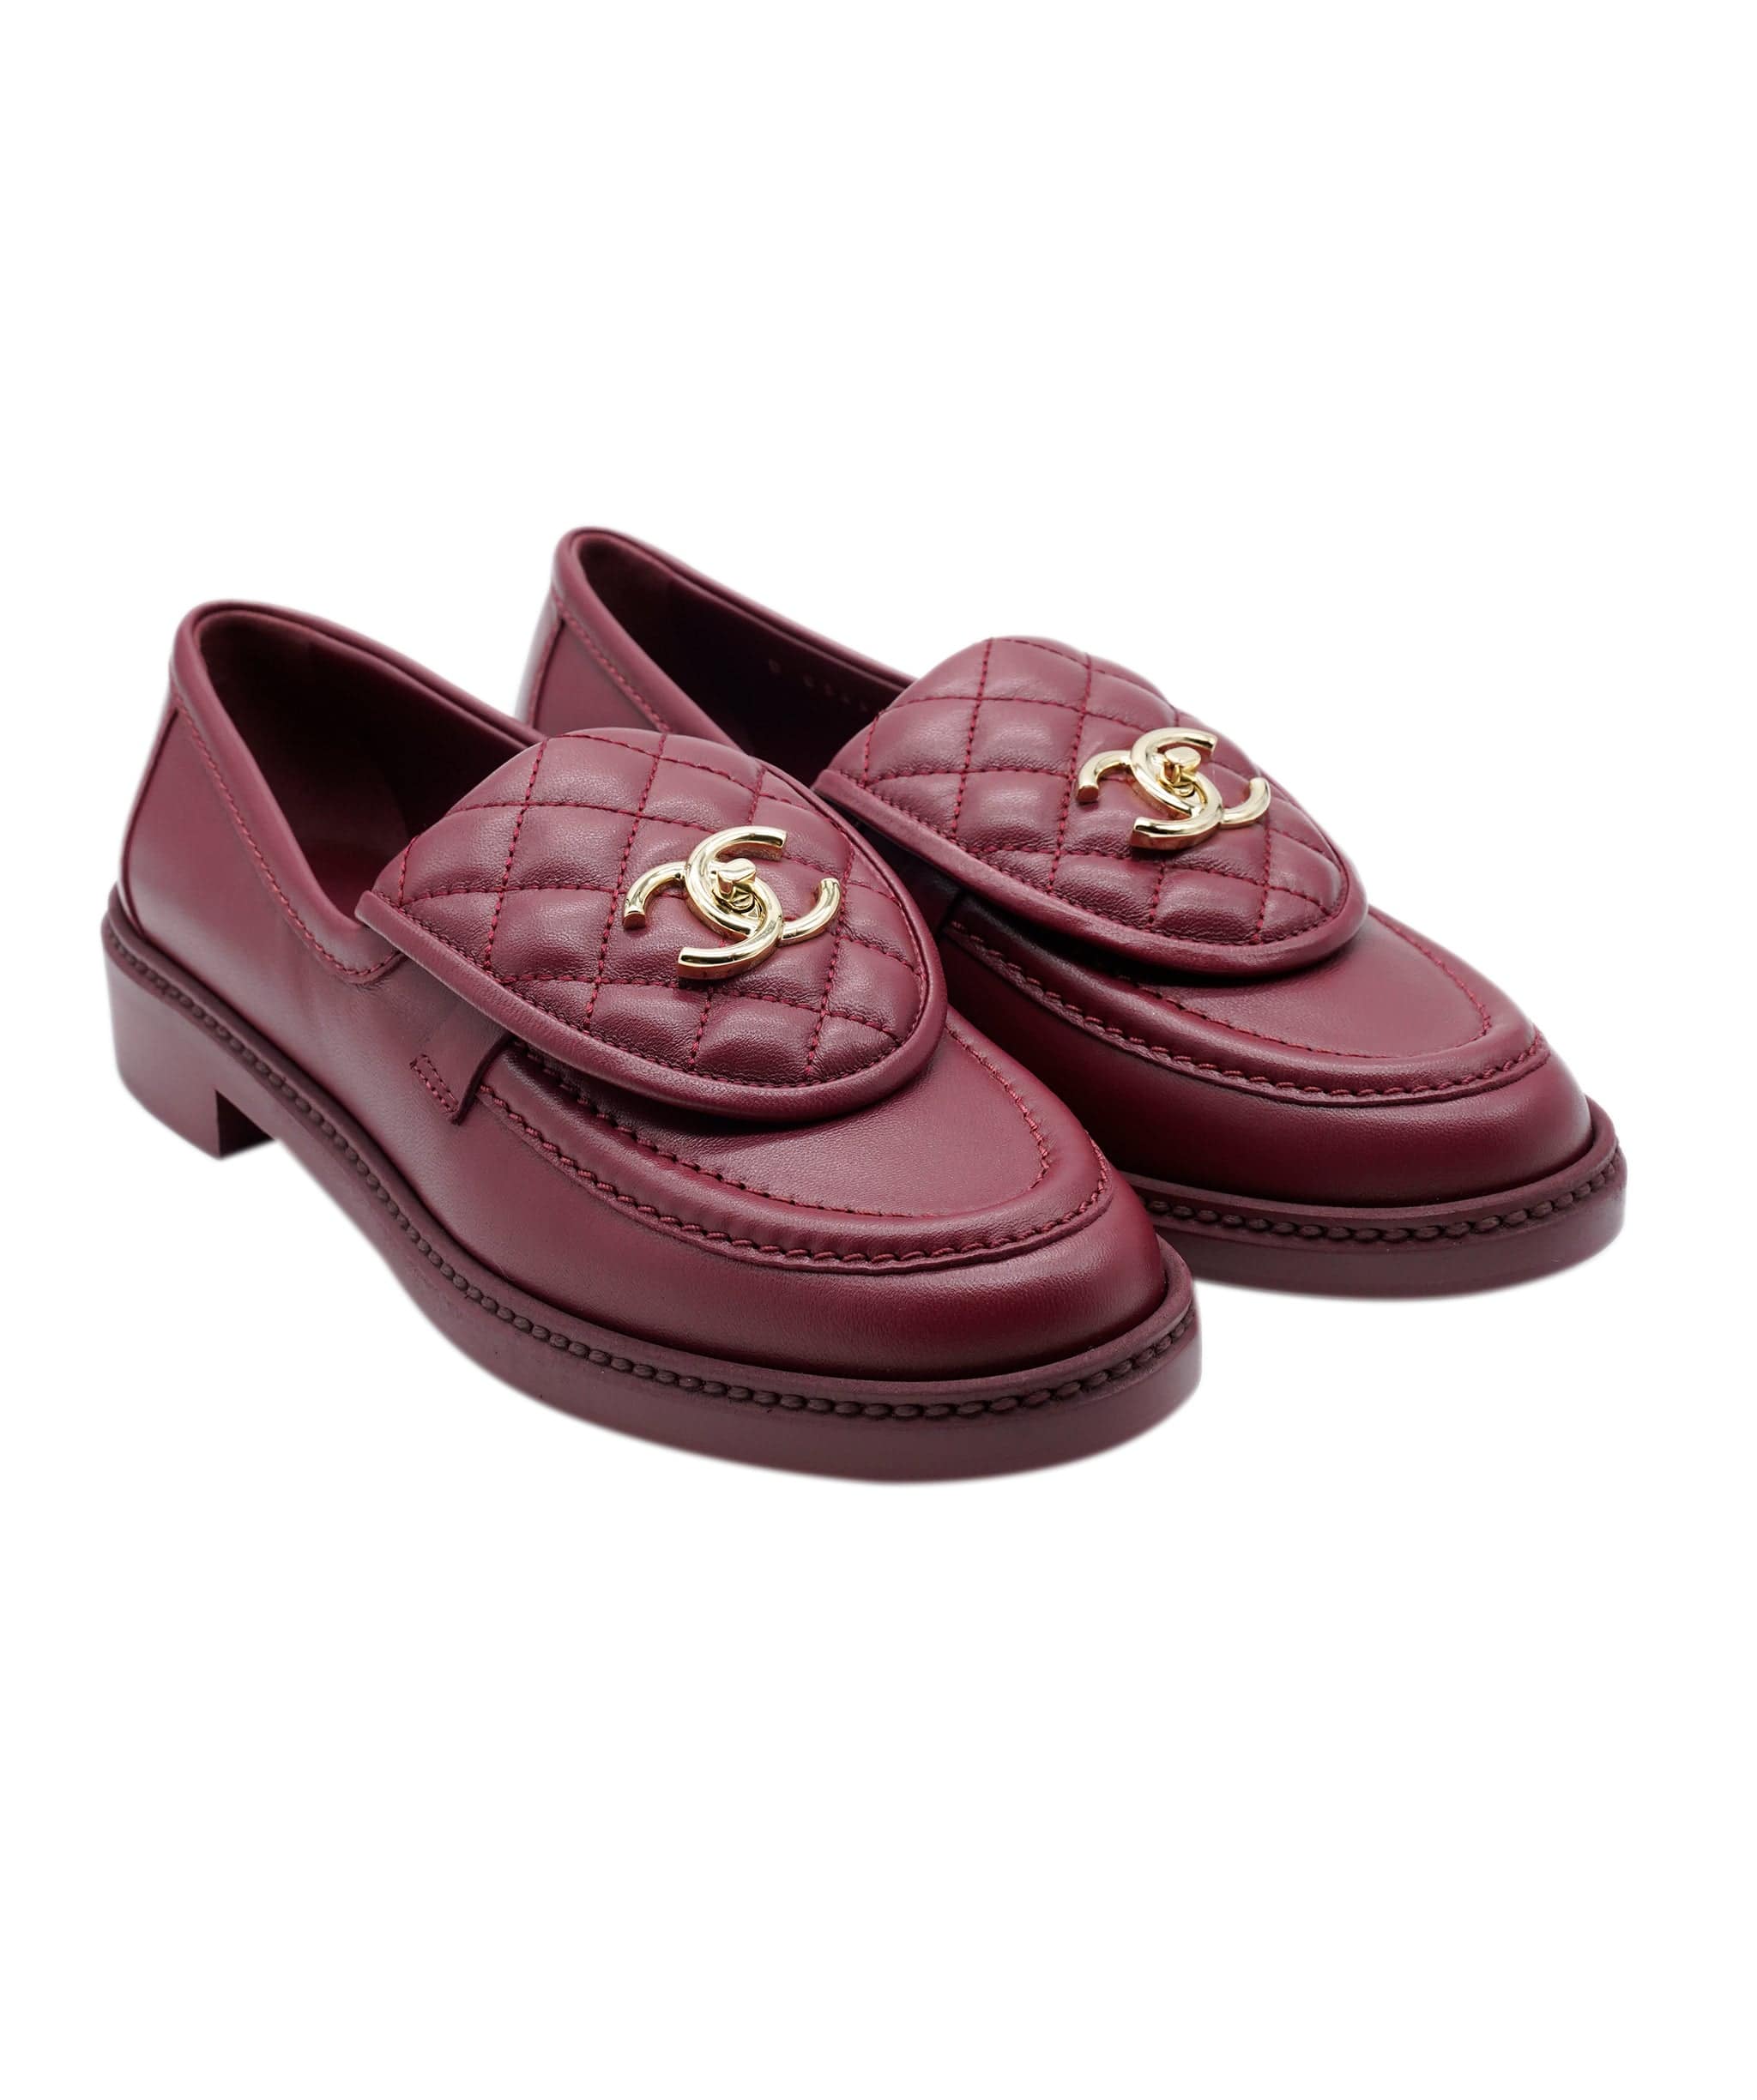 Chanel Chanel burgundy loafers size 38 - AJC0273